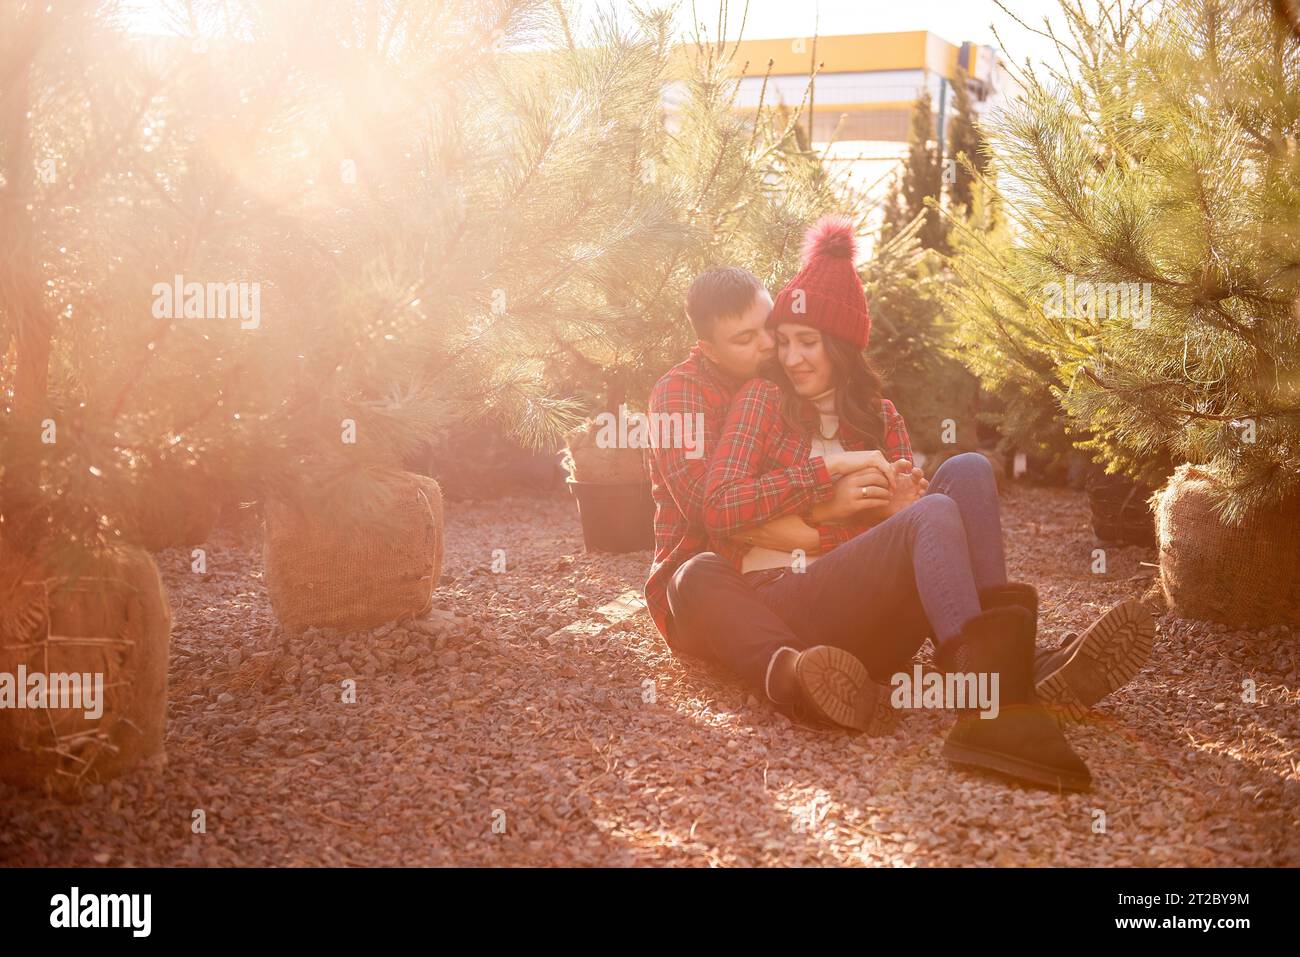 In sunlight young couple relaxing in forest wearing red checkered shirts, sitting among Christmas tree seedlings at street market. Man hugs woman in k Stock Photo